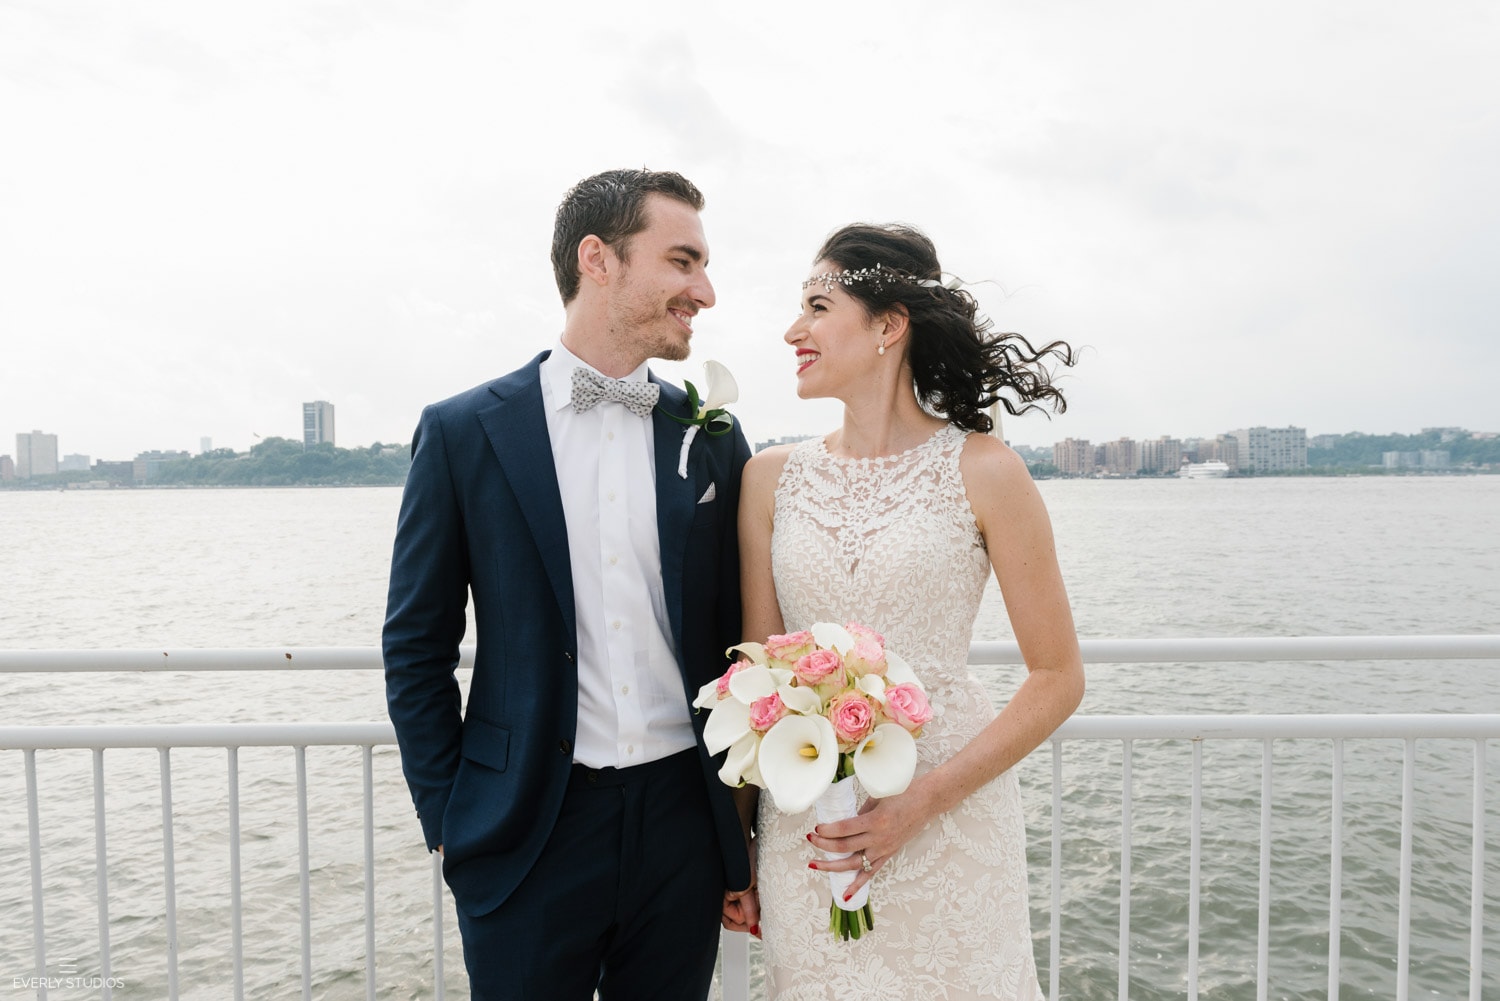 Bride and groom at Chelsea Piers Sunset Terrace wedding on the Hudson River in NYC